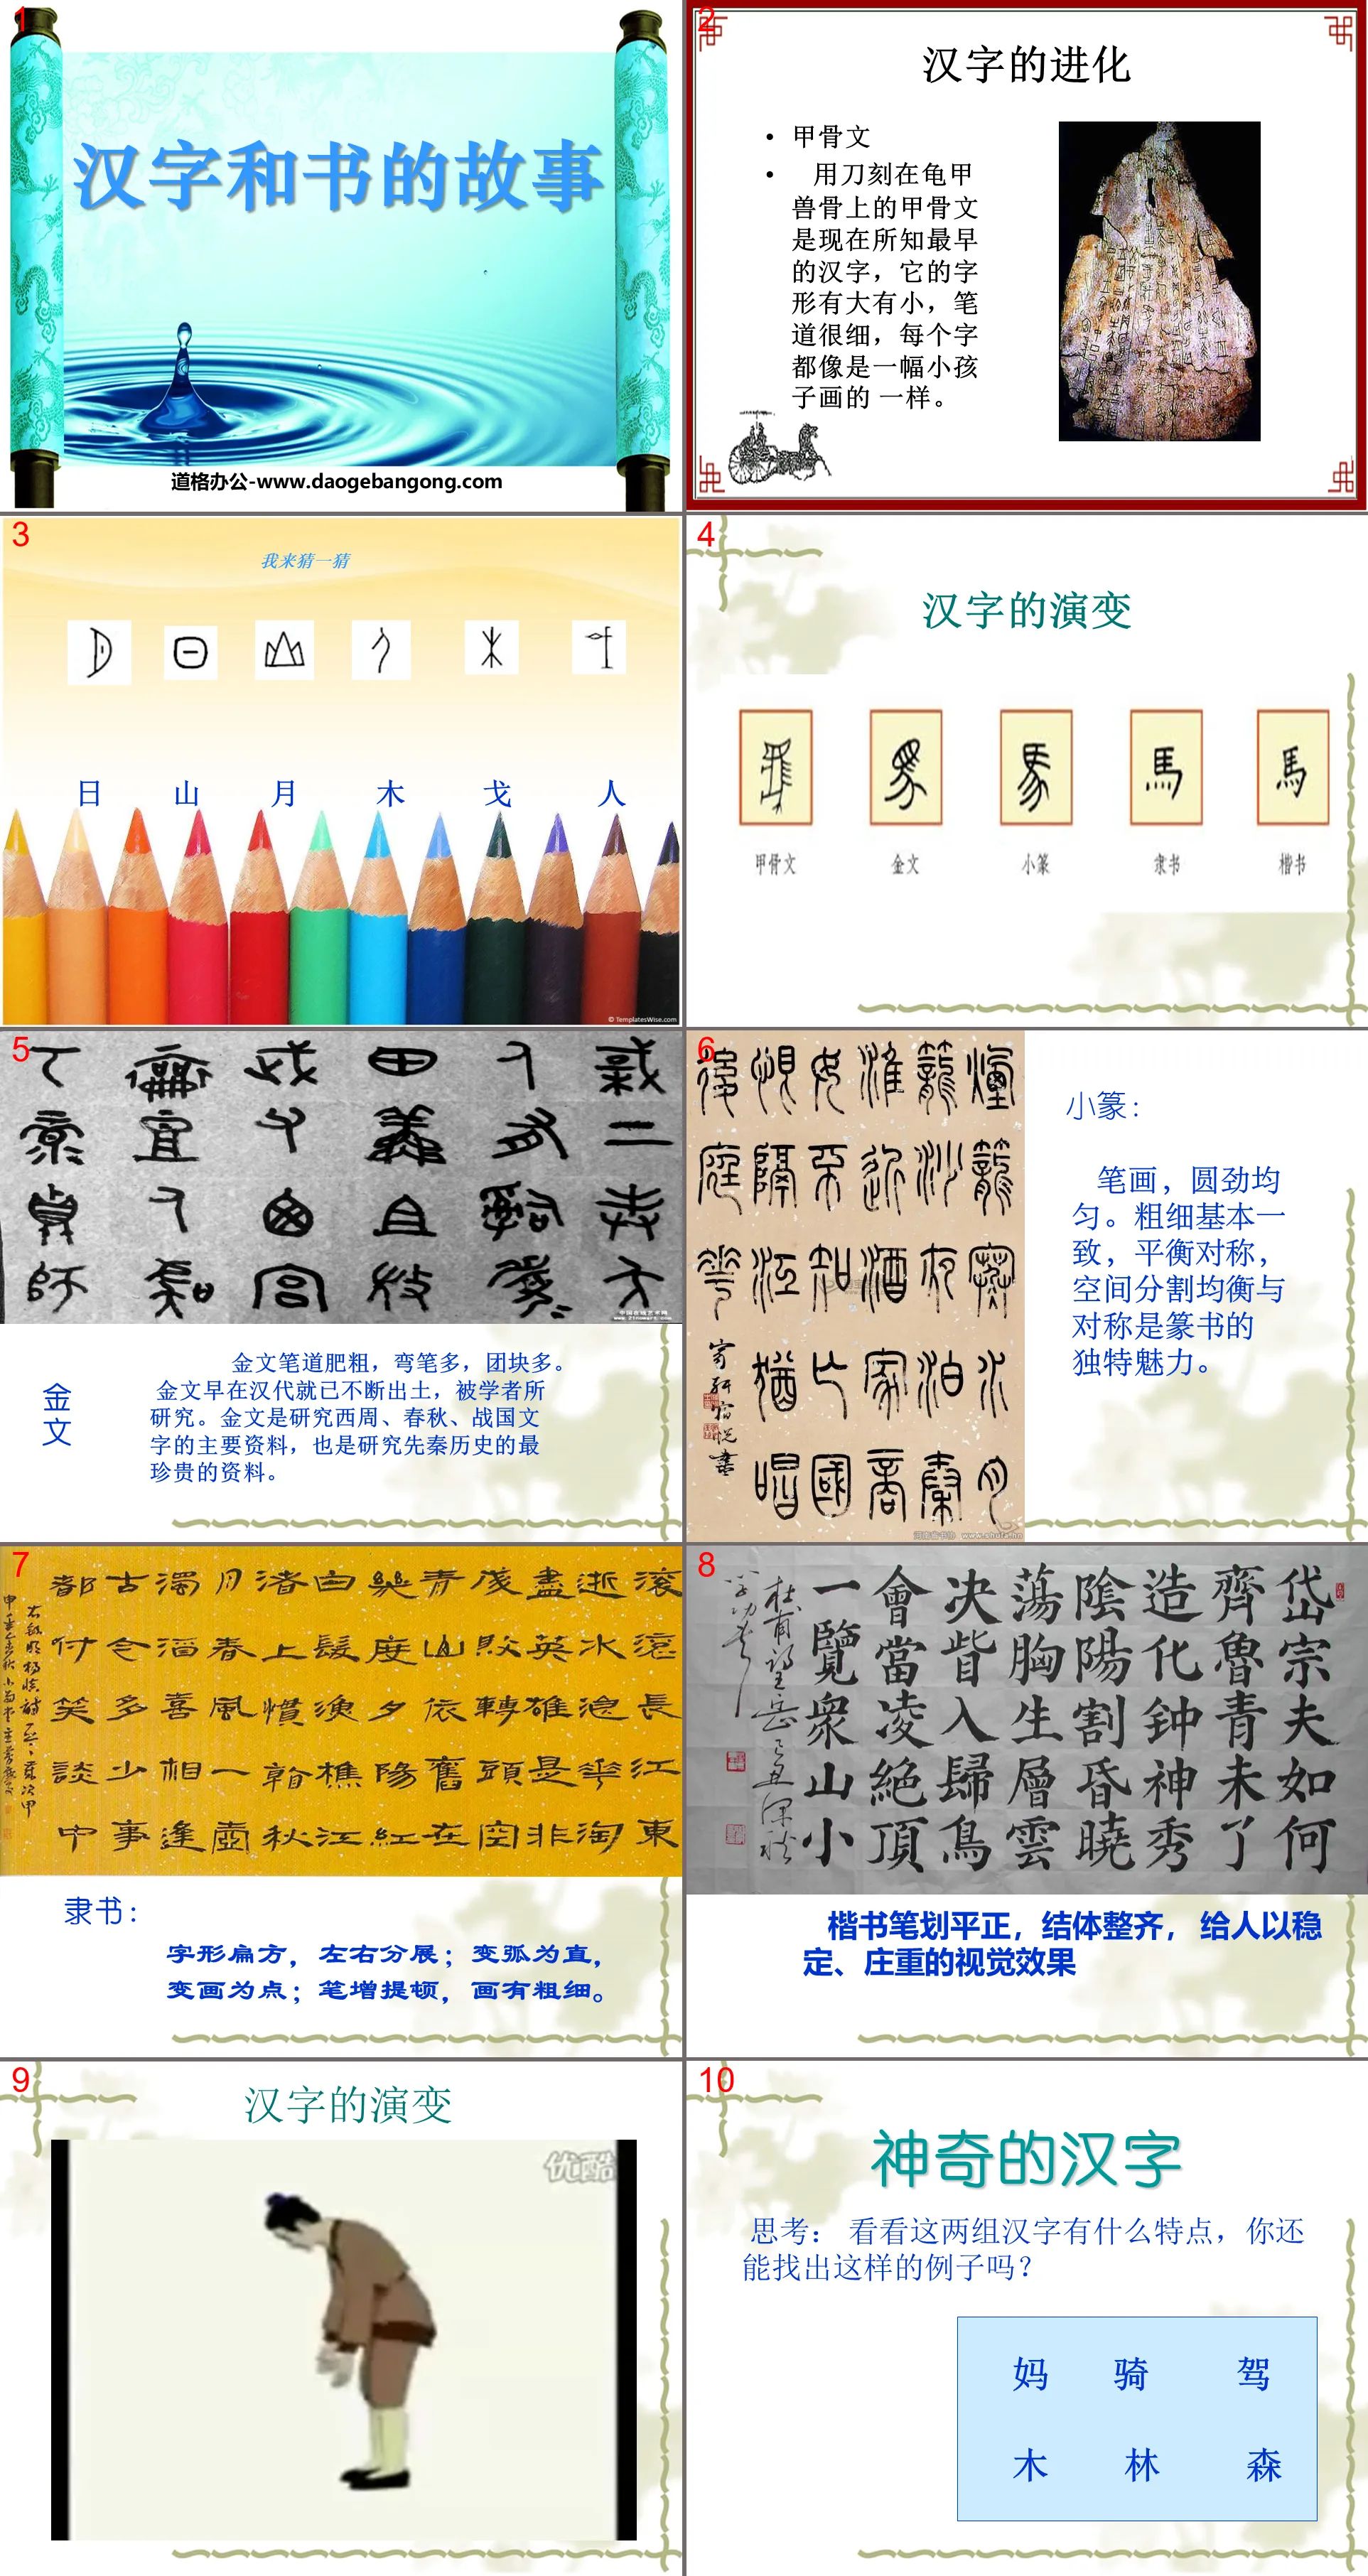 "The Story of Chinese Characters and Books" tracing the origins PPT courseware